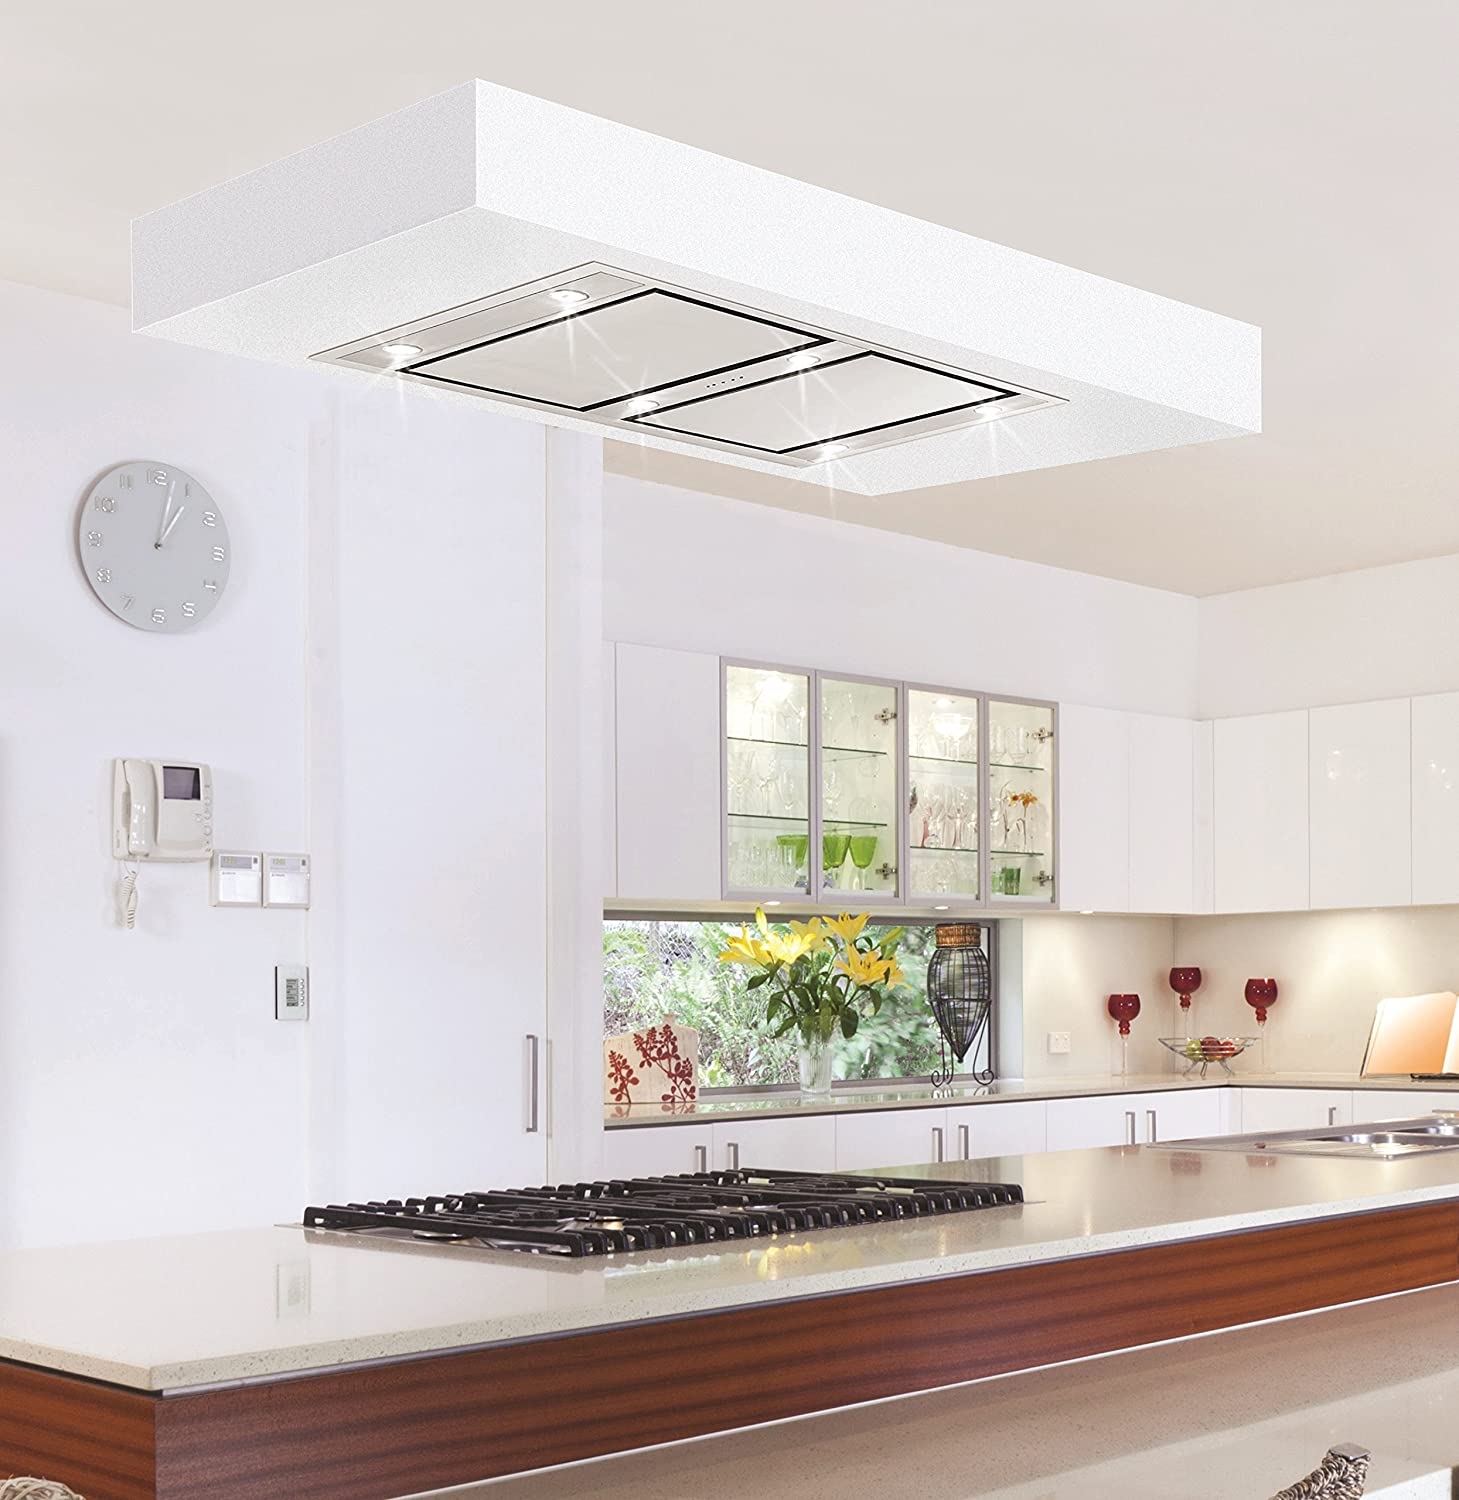 8 Pics Kitchen Extractor Fans Ceiling Mounted And View Alqu Blog